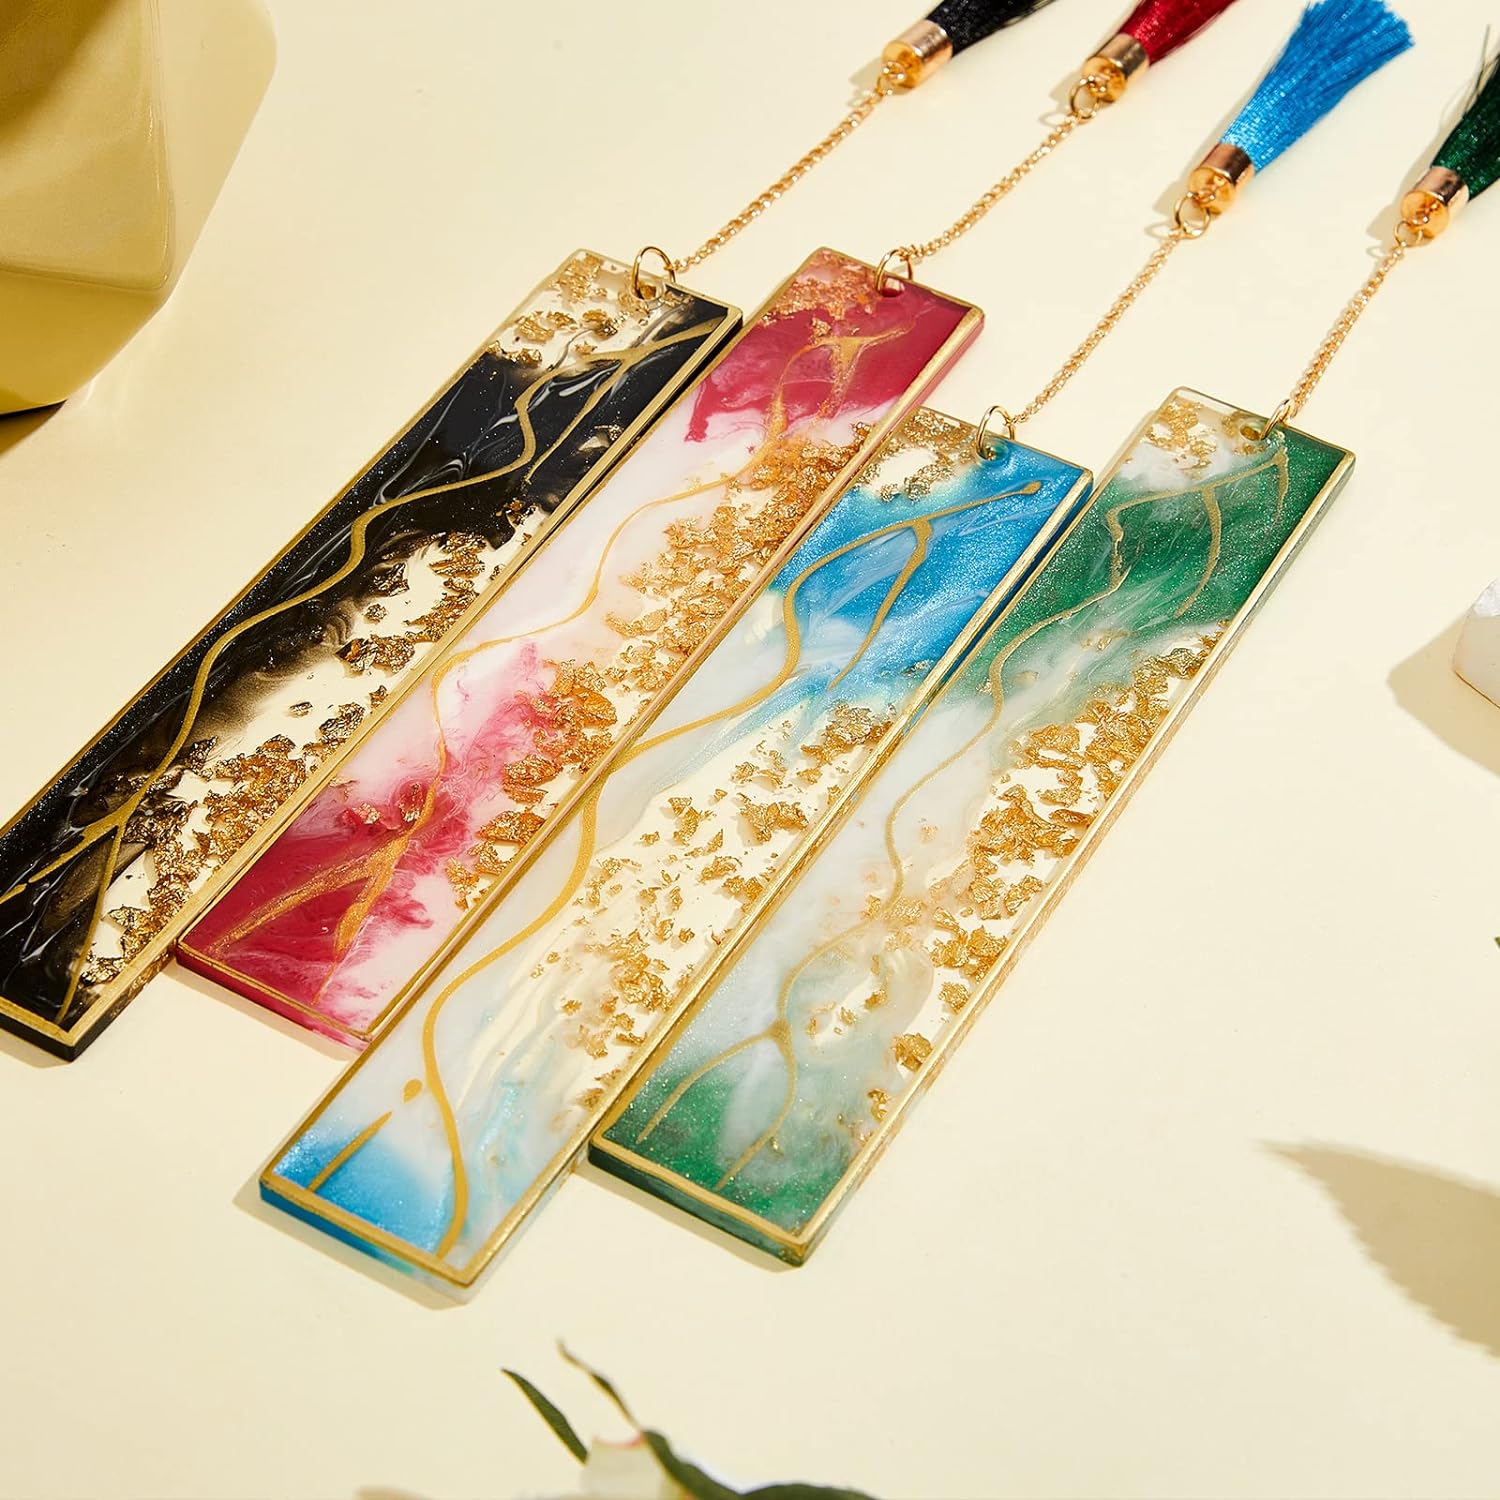 4Pcs Handmade Resin Bookmarks with Tassels